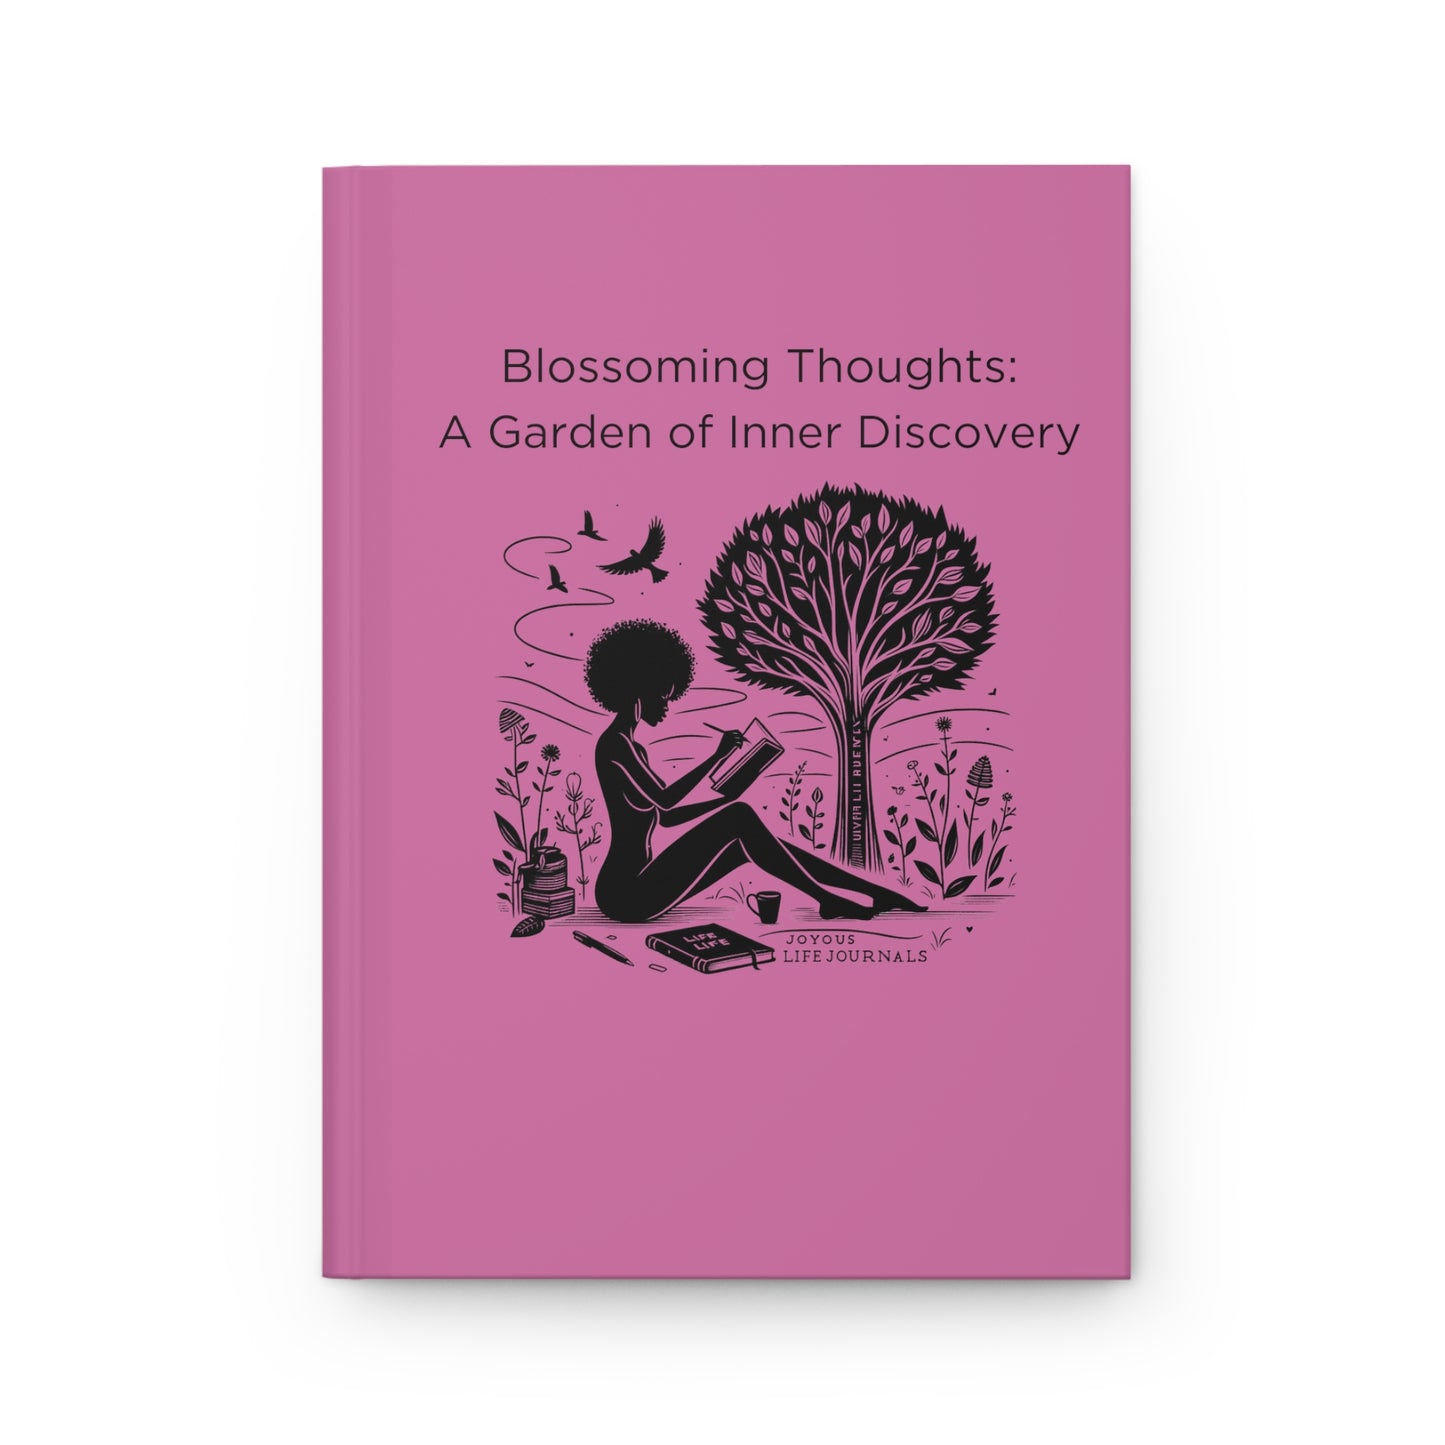 Blossoming Thoughts: A Garden of Inner Discovery, Joyous Life Journals